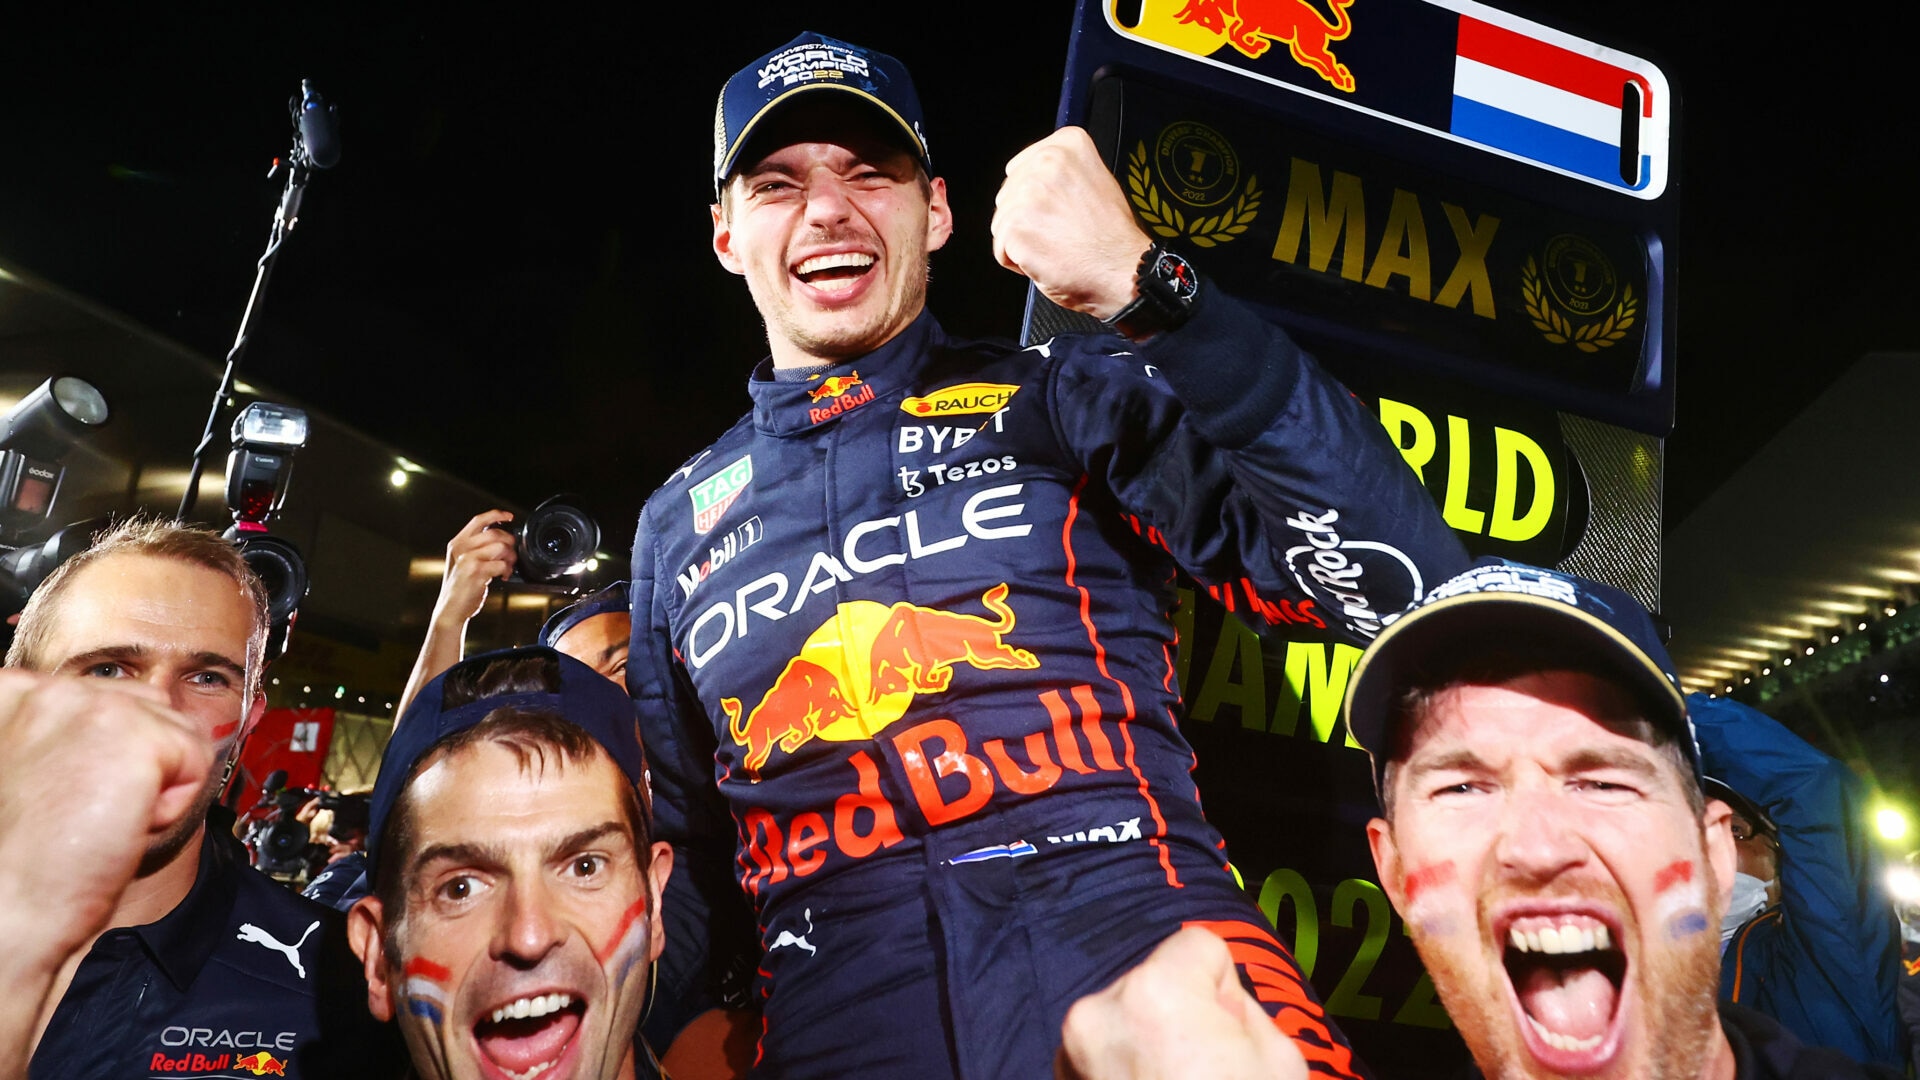 Red Bull wins constructors' championship following Max Verstappen's victory  at Japanese Grand Prix